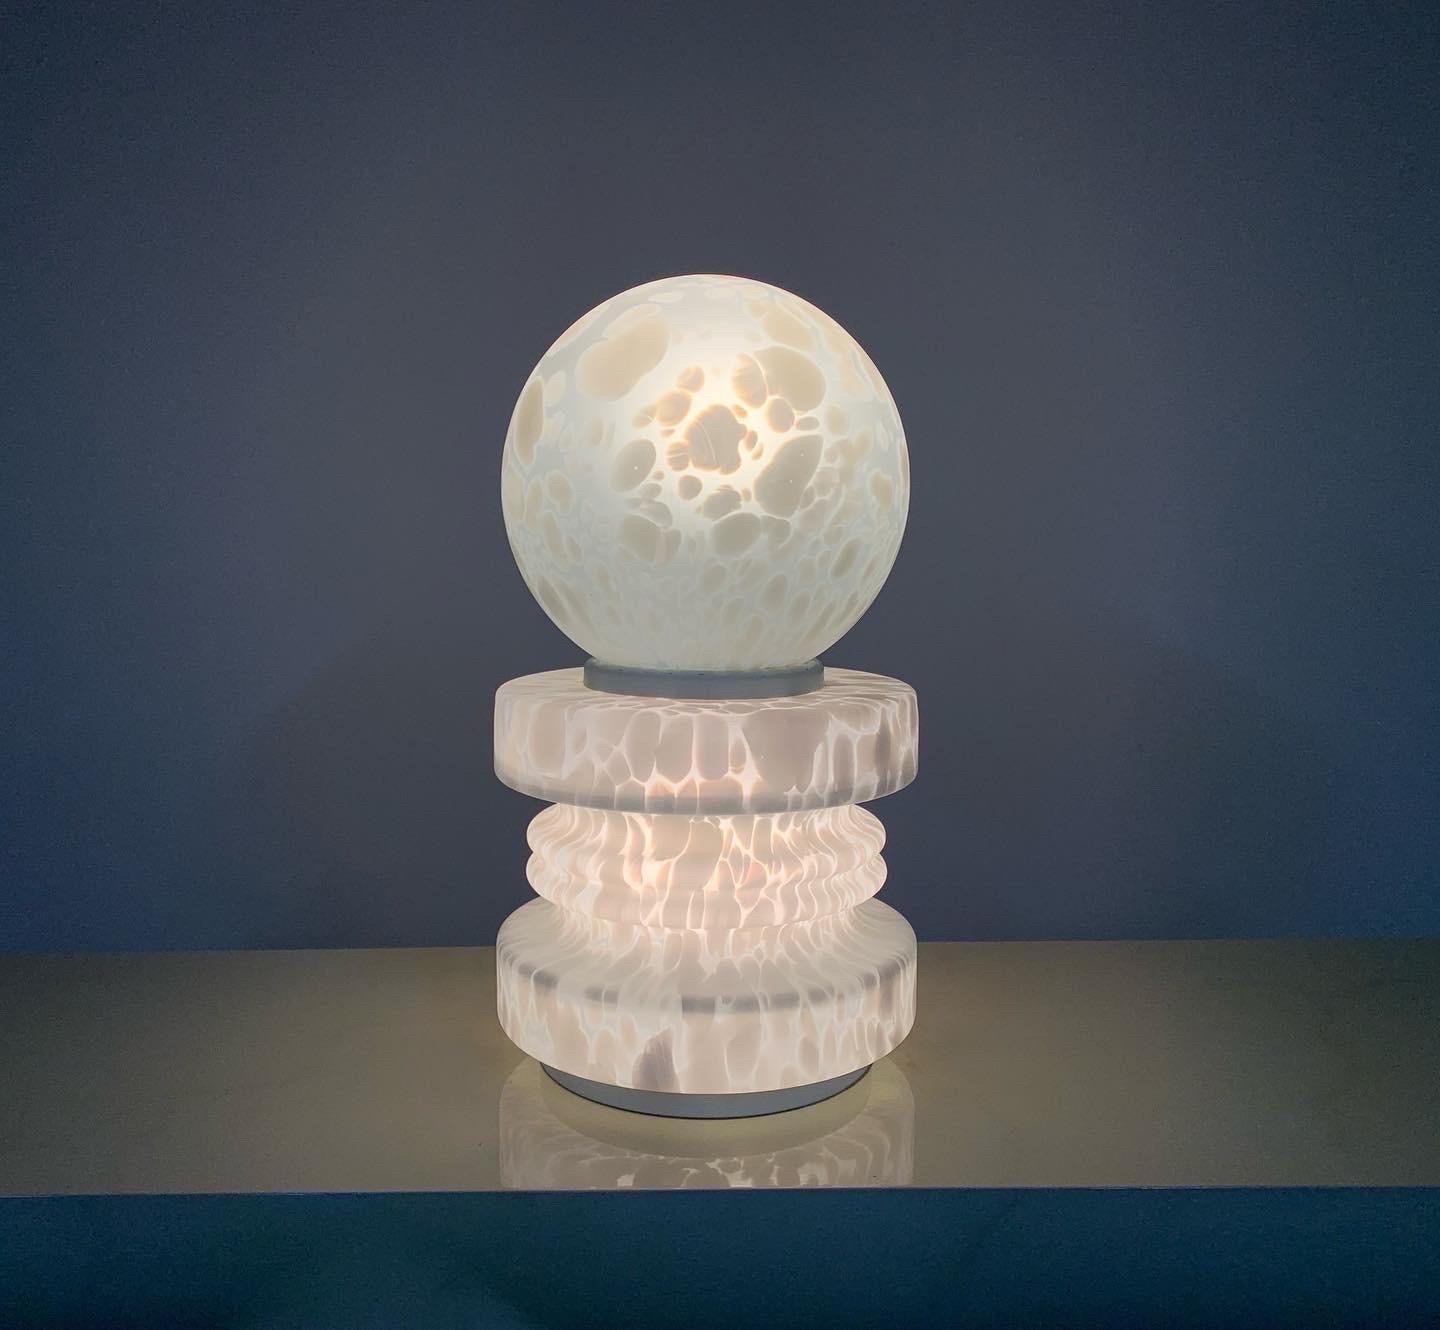 A beautiful Murano glass lamp by Mazzega and designed by Carlos Nason having cumulus form and standing a monumental 22.5” with a diameter of 12”. 
Very nice overall condition. The glass is perfect with the metal supports having some rubs as shown in